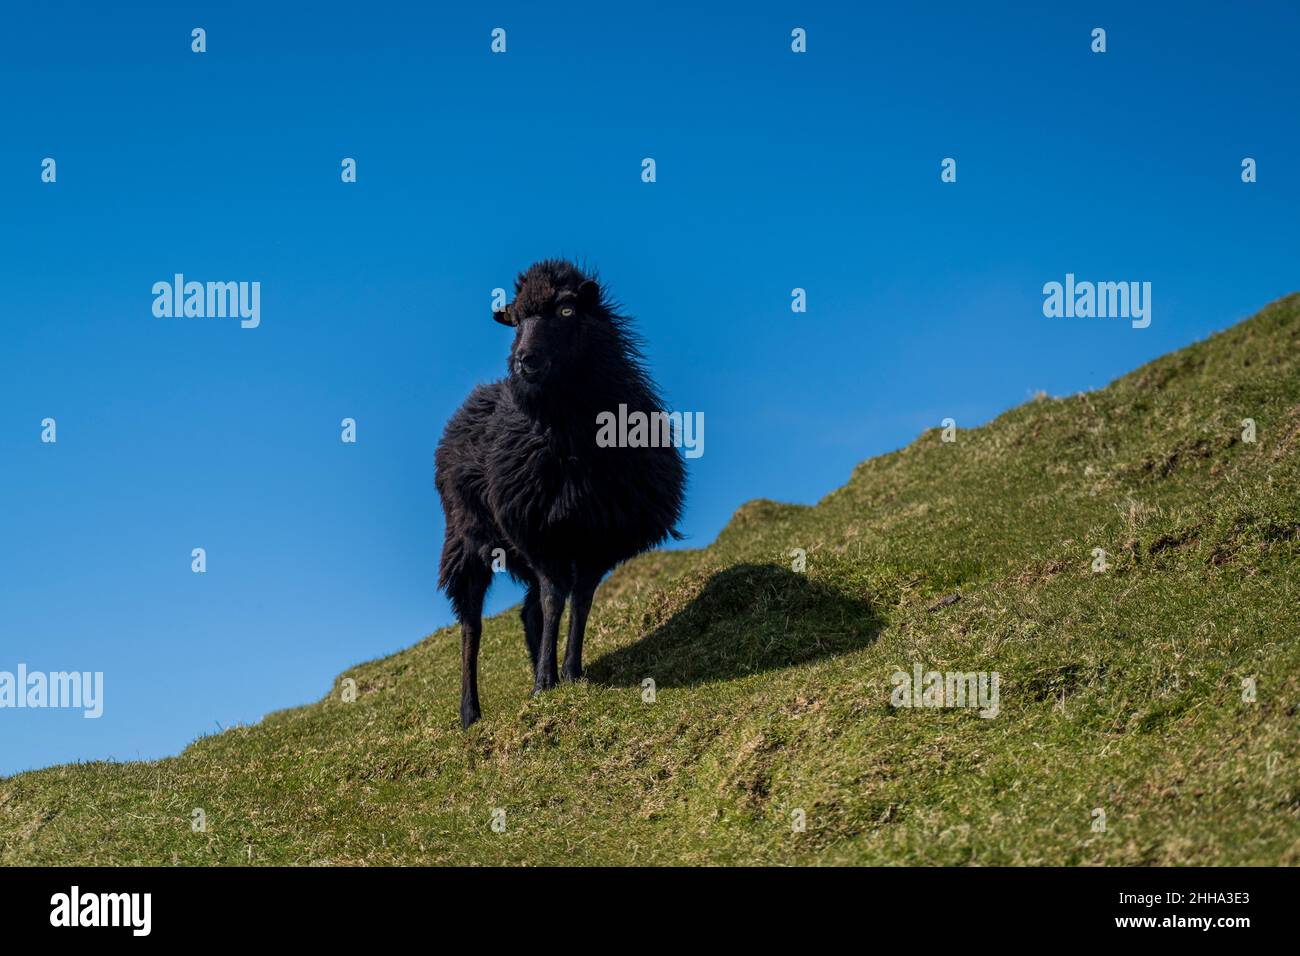 Poised black sheep looks regally from the cliffside, against a backdrop of bright blue skies. Stock Photo